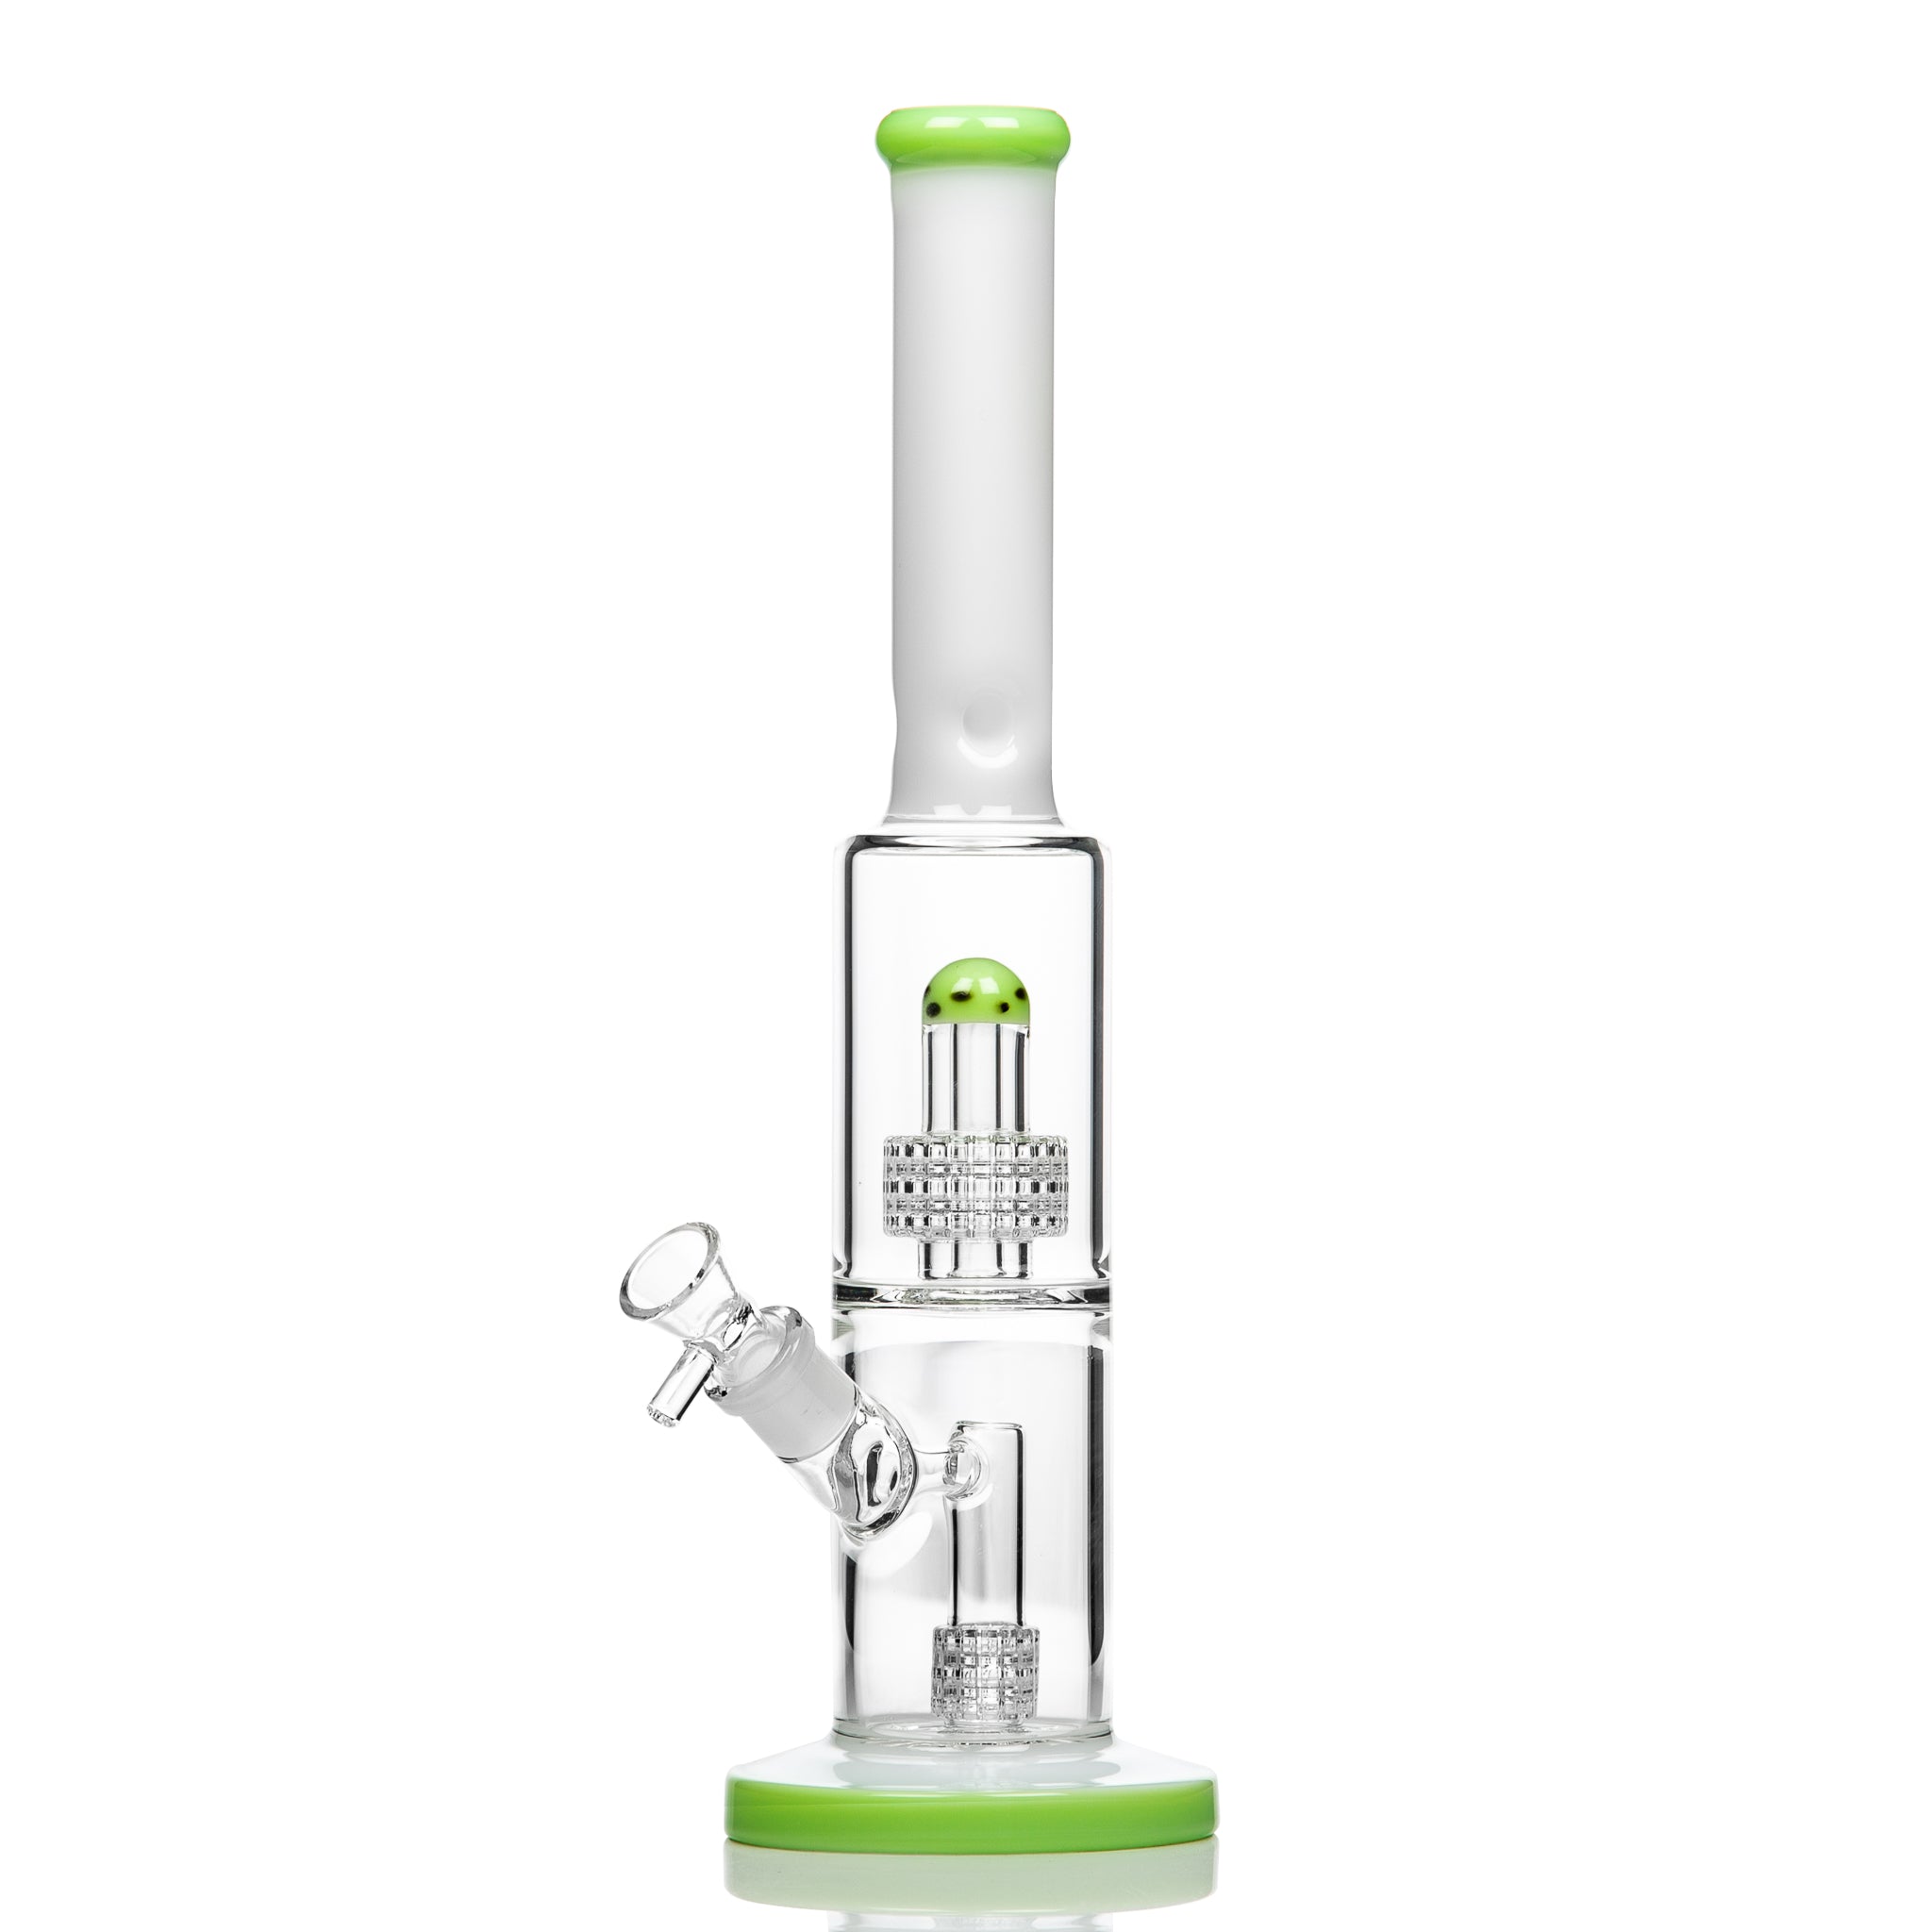 Twin perc bong with cone piece for medical cannabis.